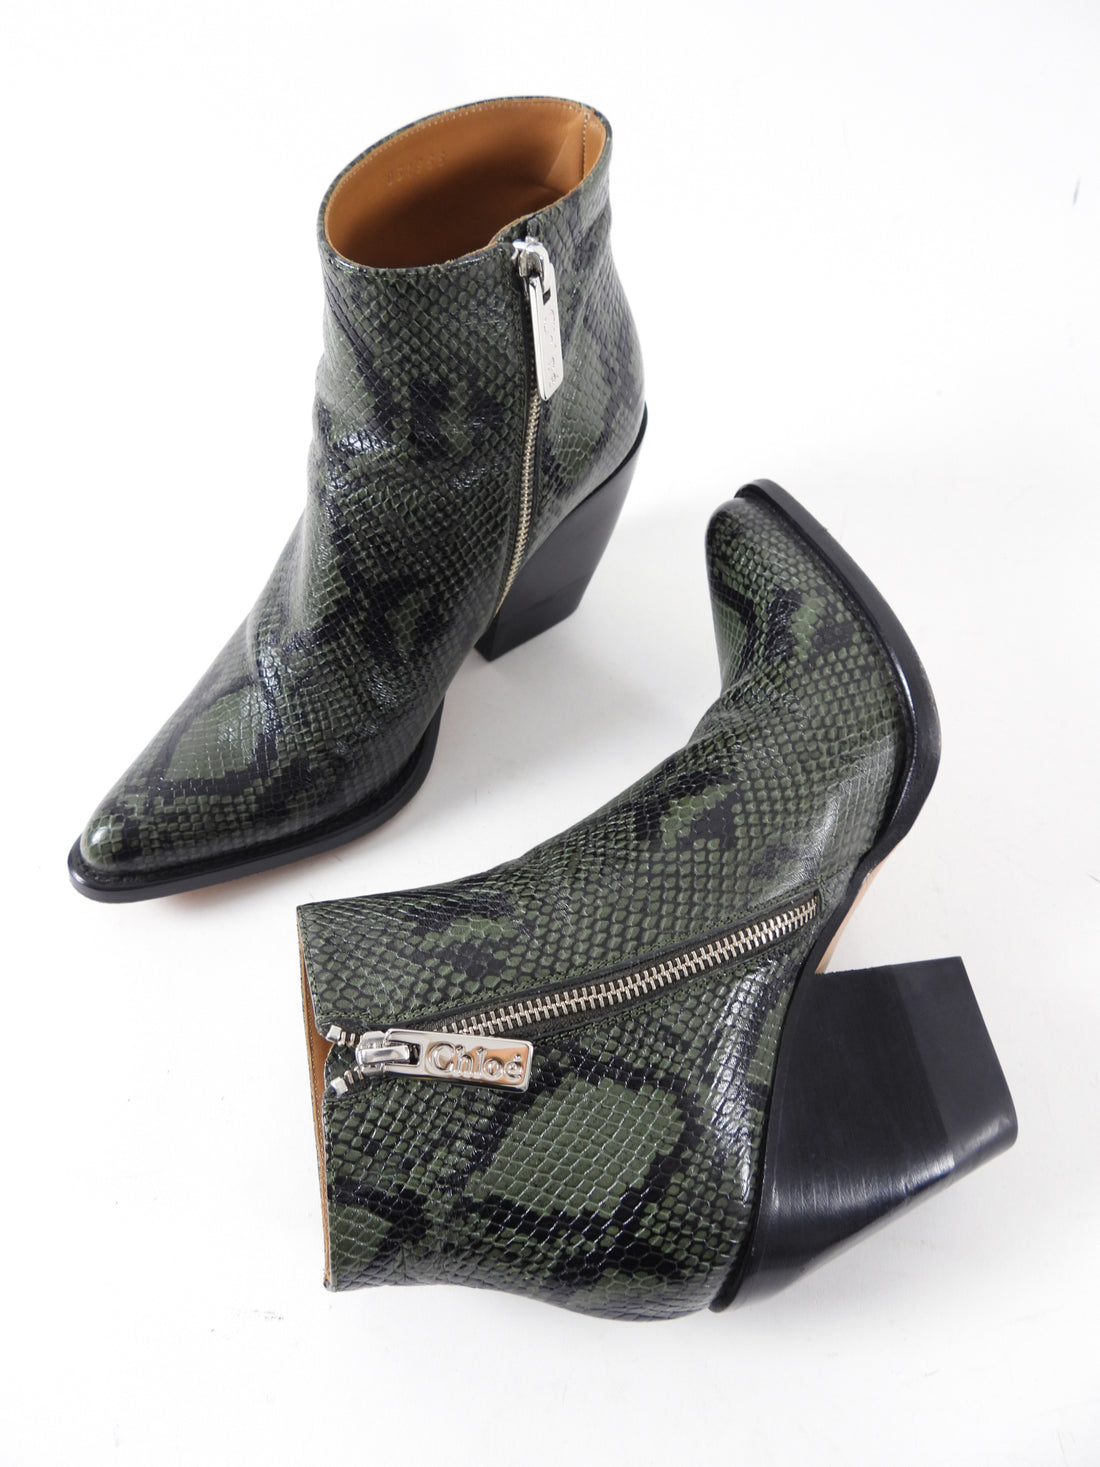 Chloe Green Printed Leather Ankle Boot - USA 9